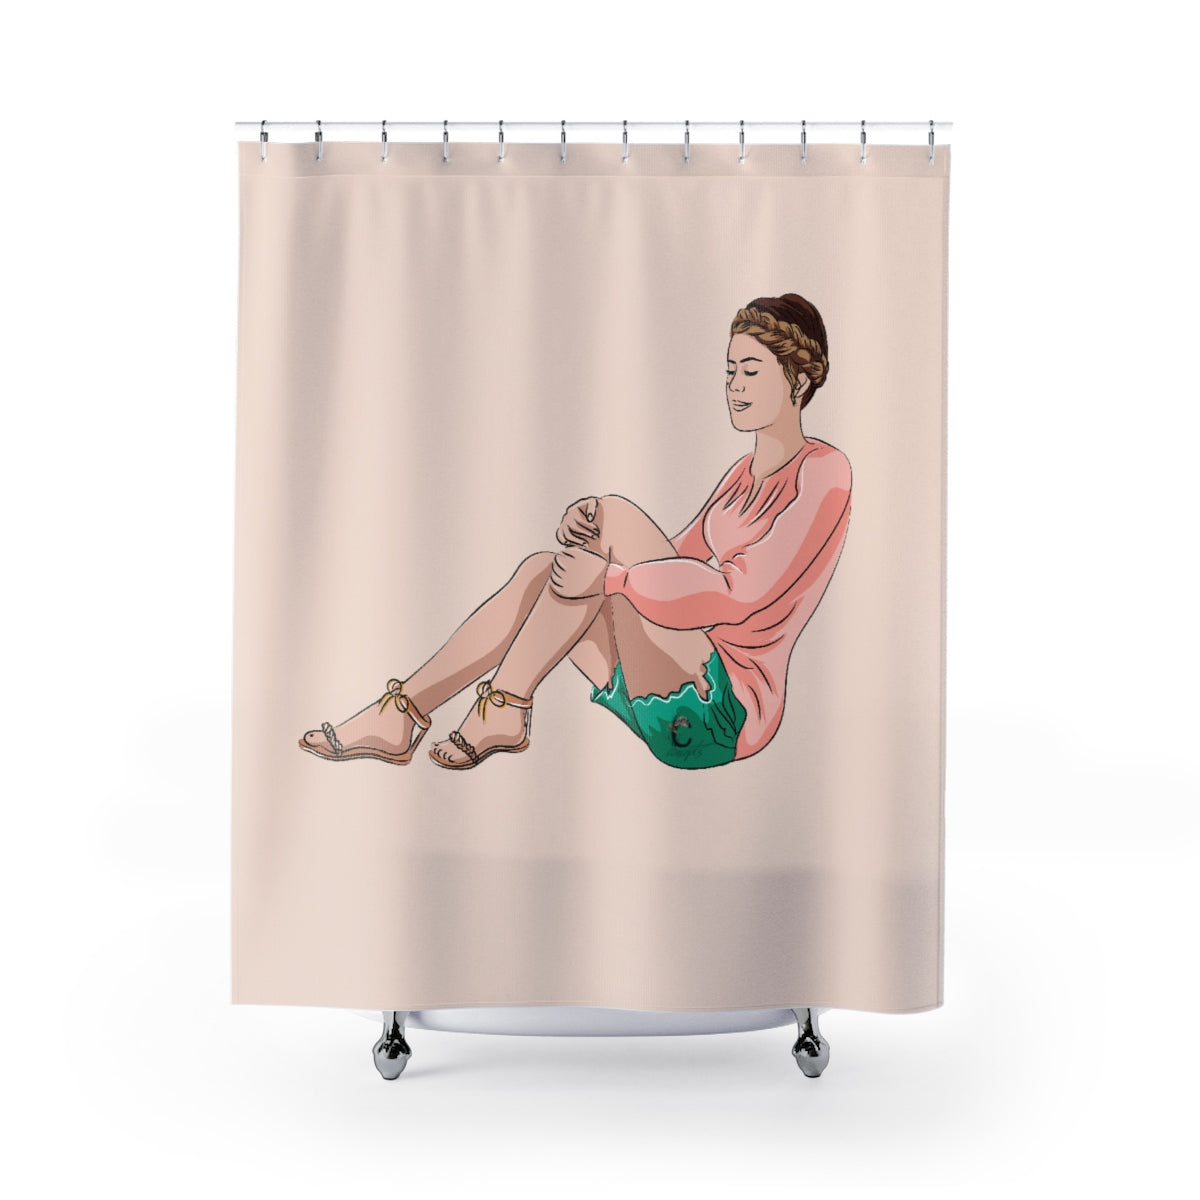 Tranquil Shower Curtain